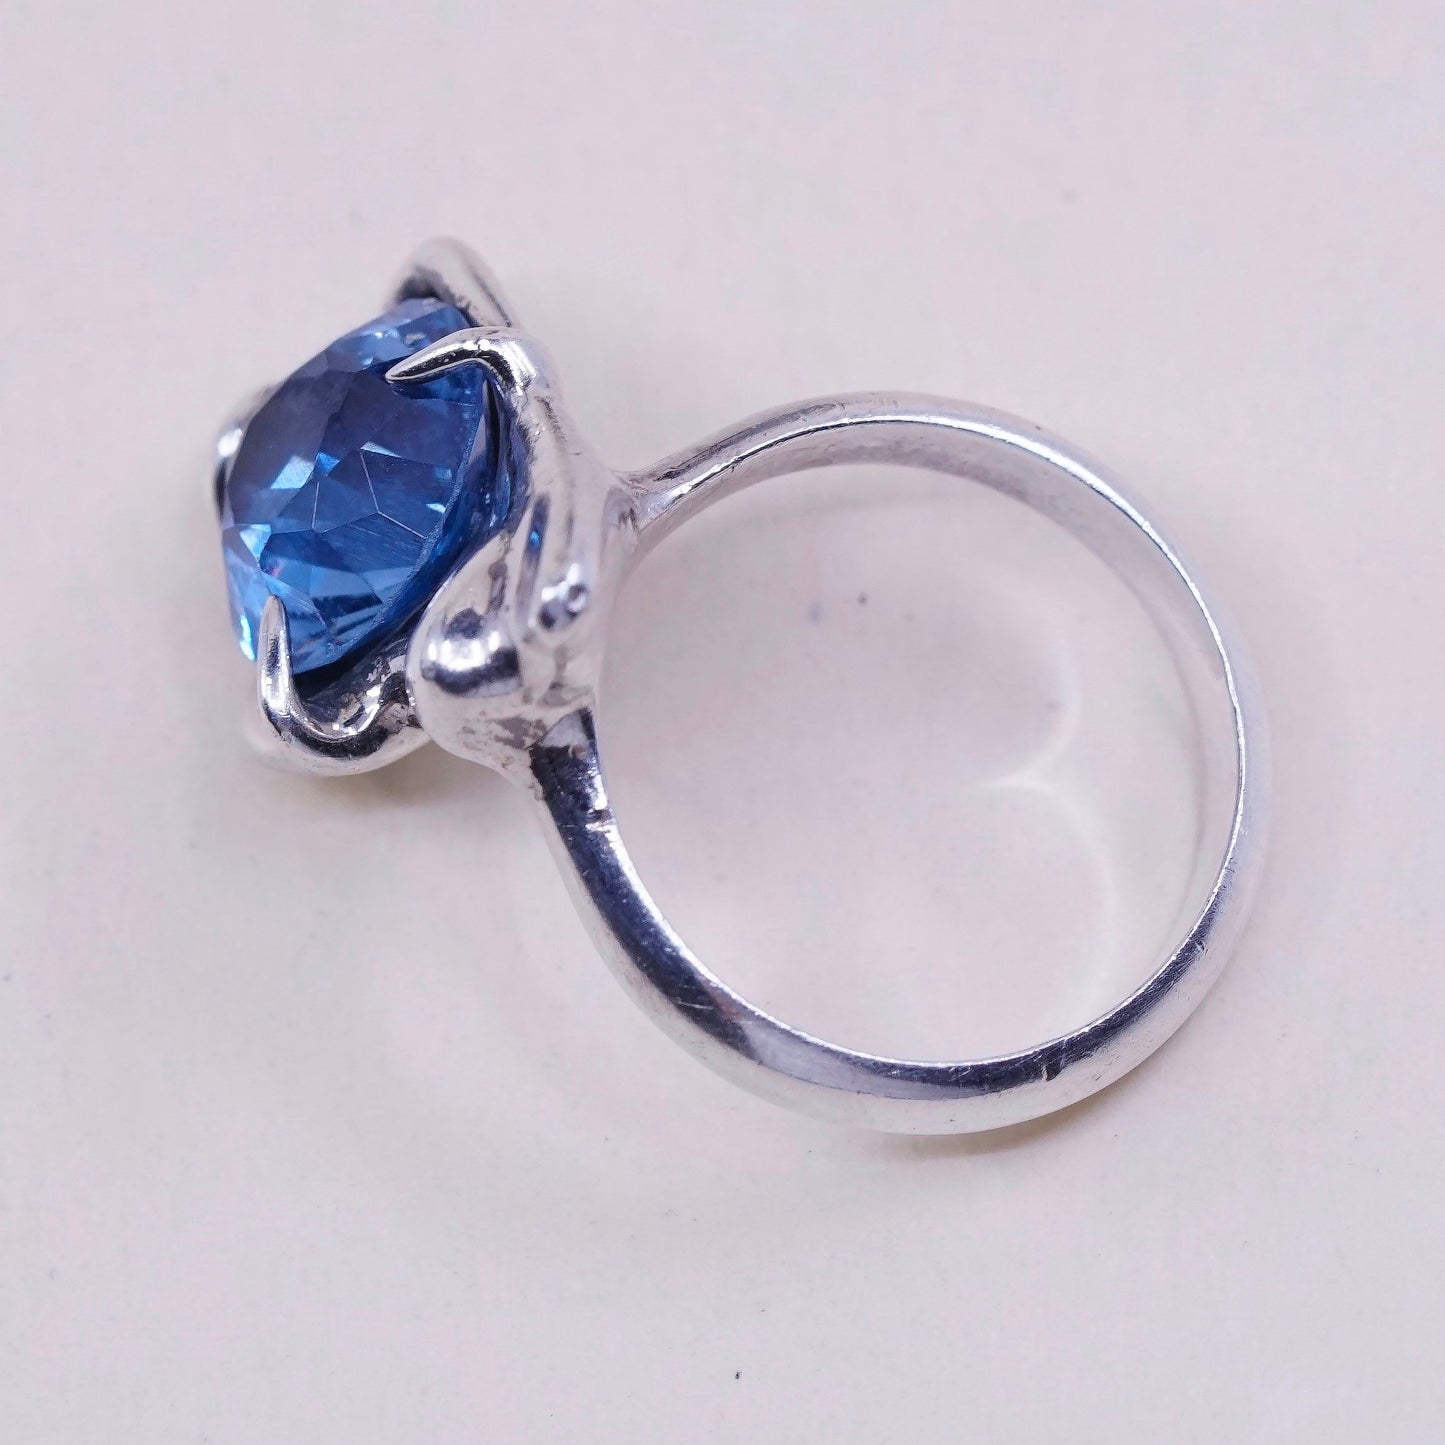 sz 5.5, vintage Sterling 925 silver statement engagement ring with blue topaz